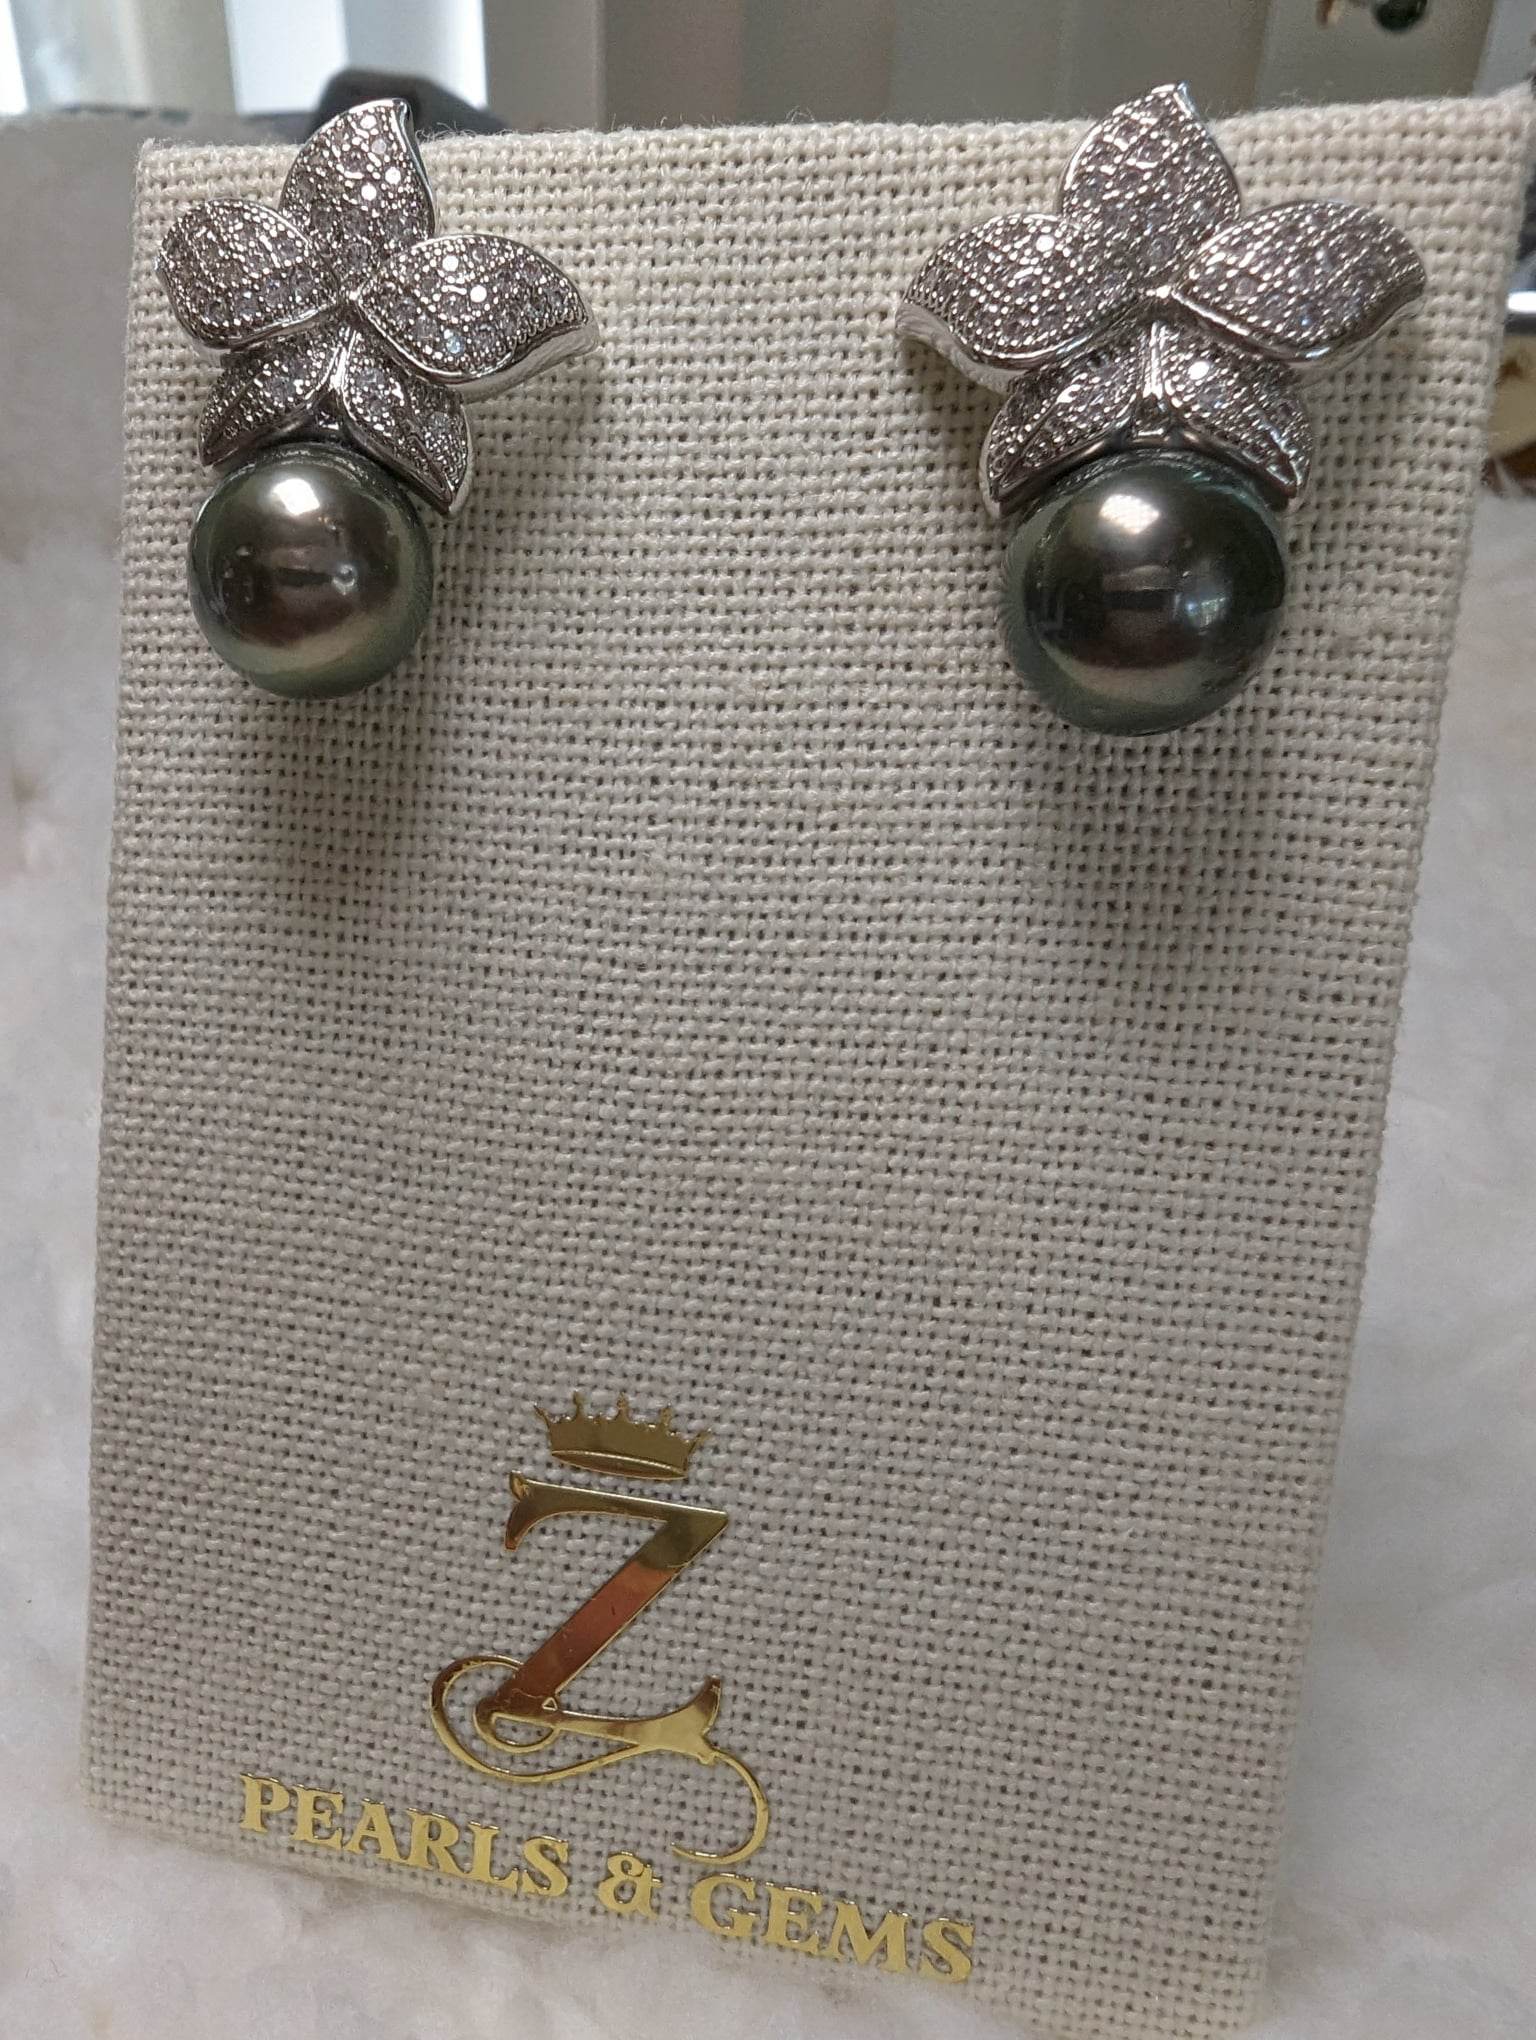 Exquisite Pearl Earrings for Timeless Elegance | Z Pearls & Gems